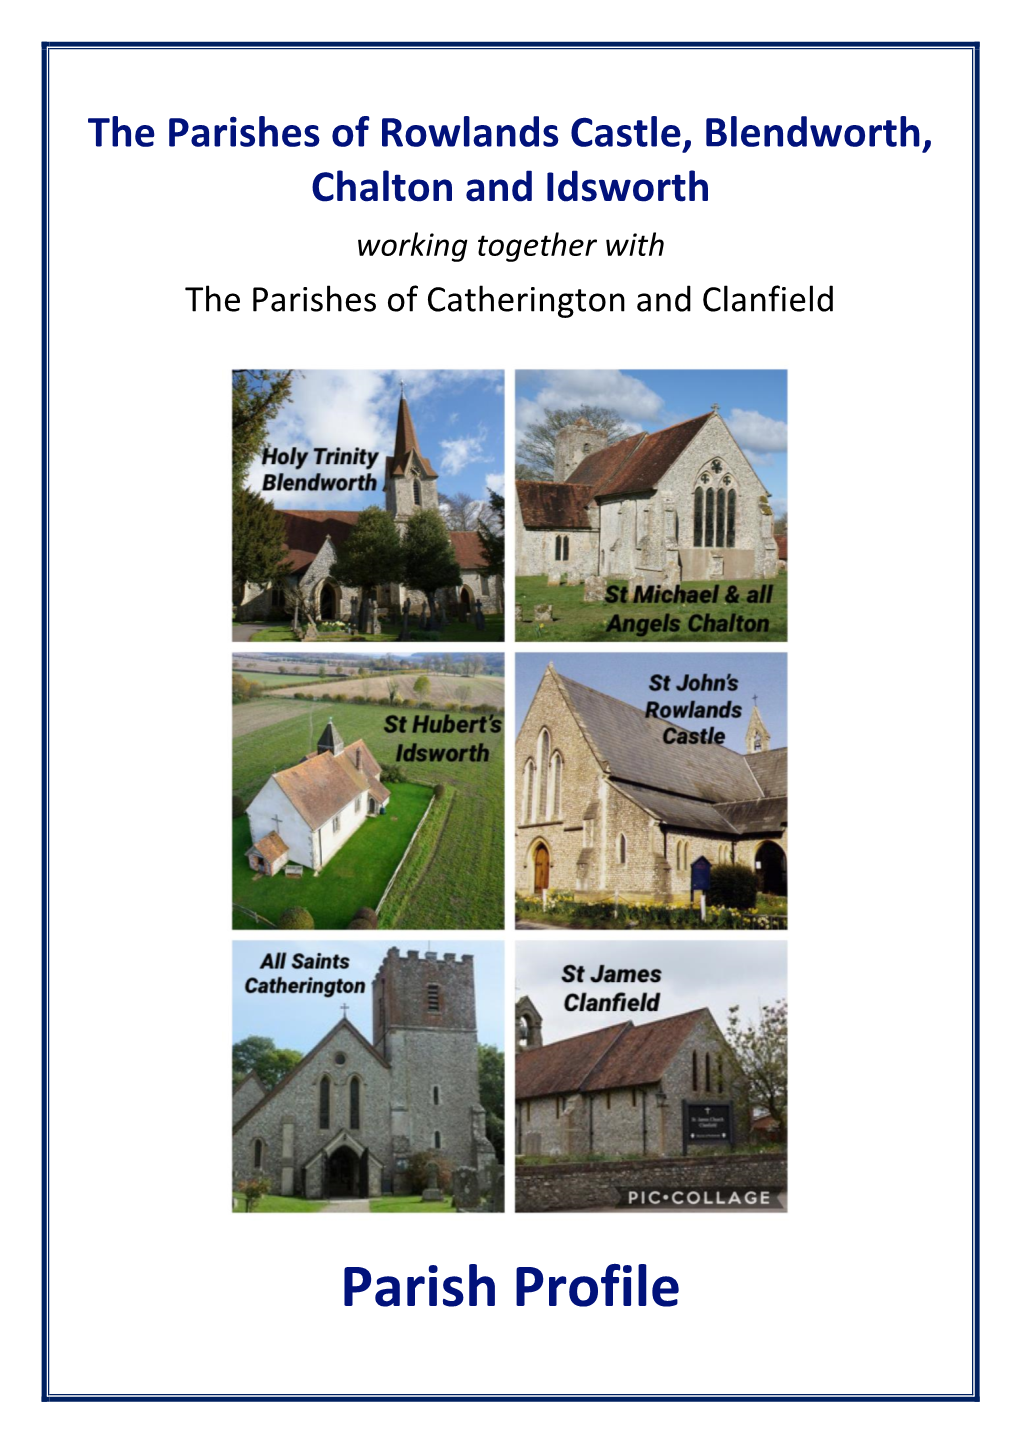 The Parishes of Rowlands Castle, Blendworth, Chalton and Idsworth Working Together with the Parishes of Catherington and Clanfield